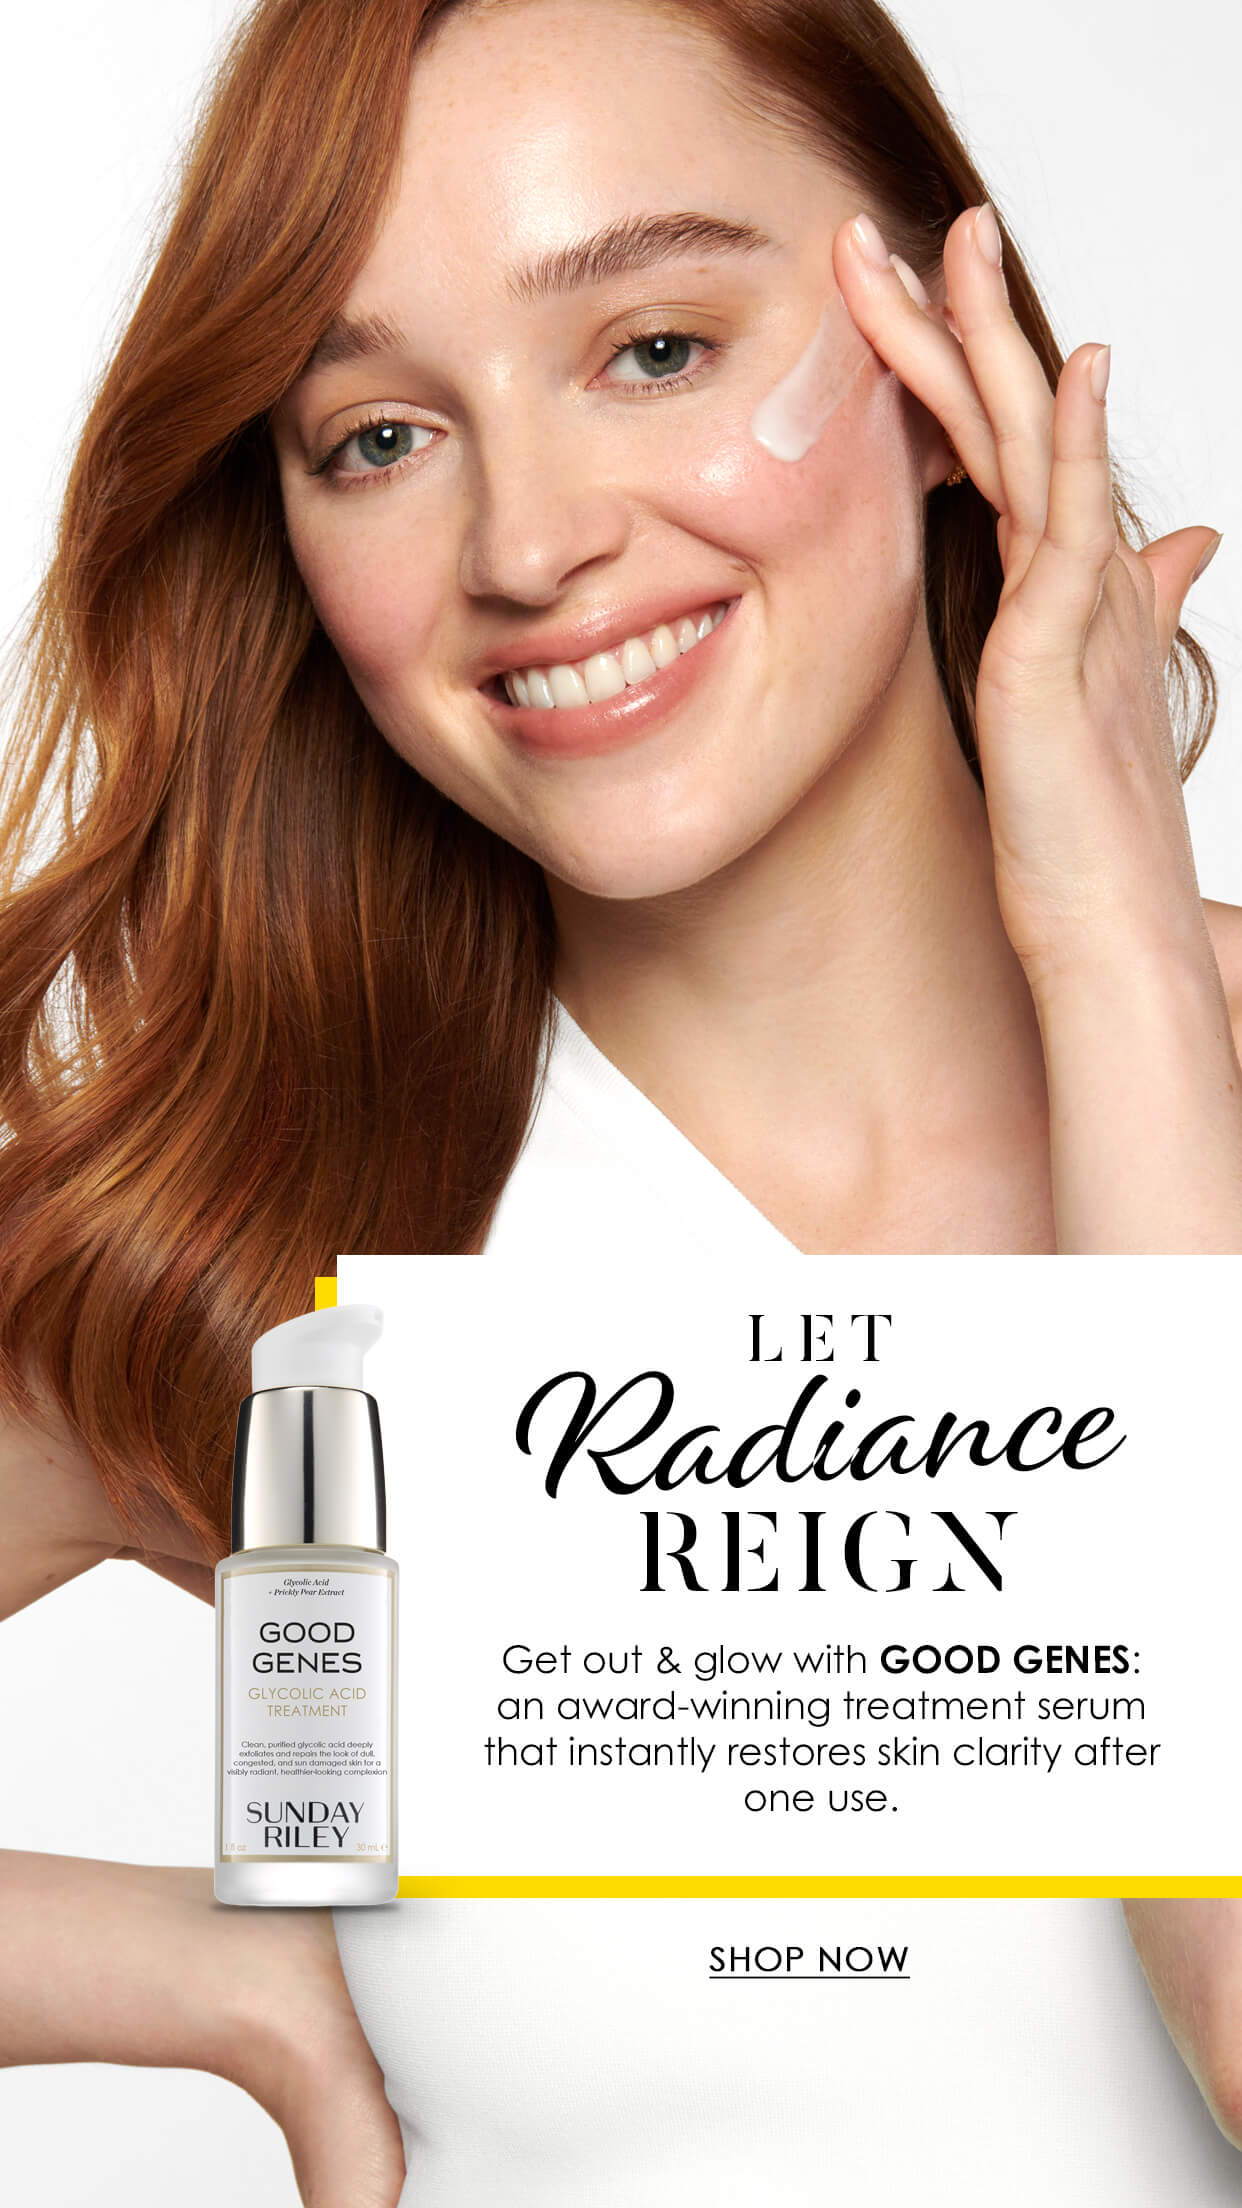 let radiance reign - Get out & glow with GOOD GENES: an award-winning treatment serum that instantly restores skin clarity after one use.